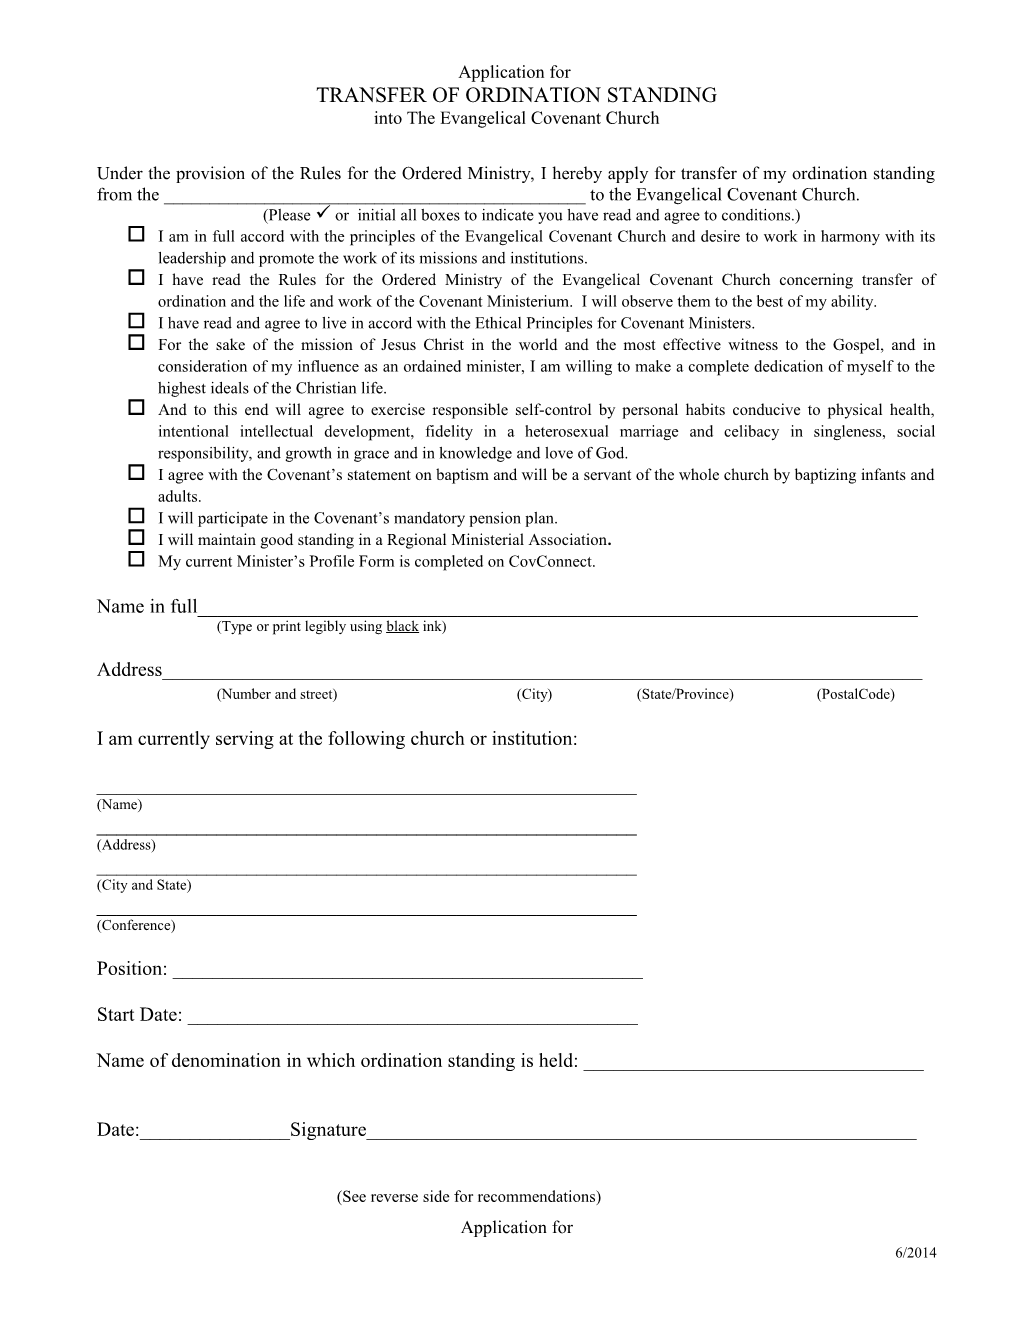 Application for Transfer of Ordination Standing